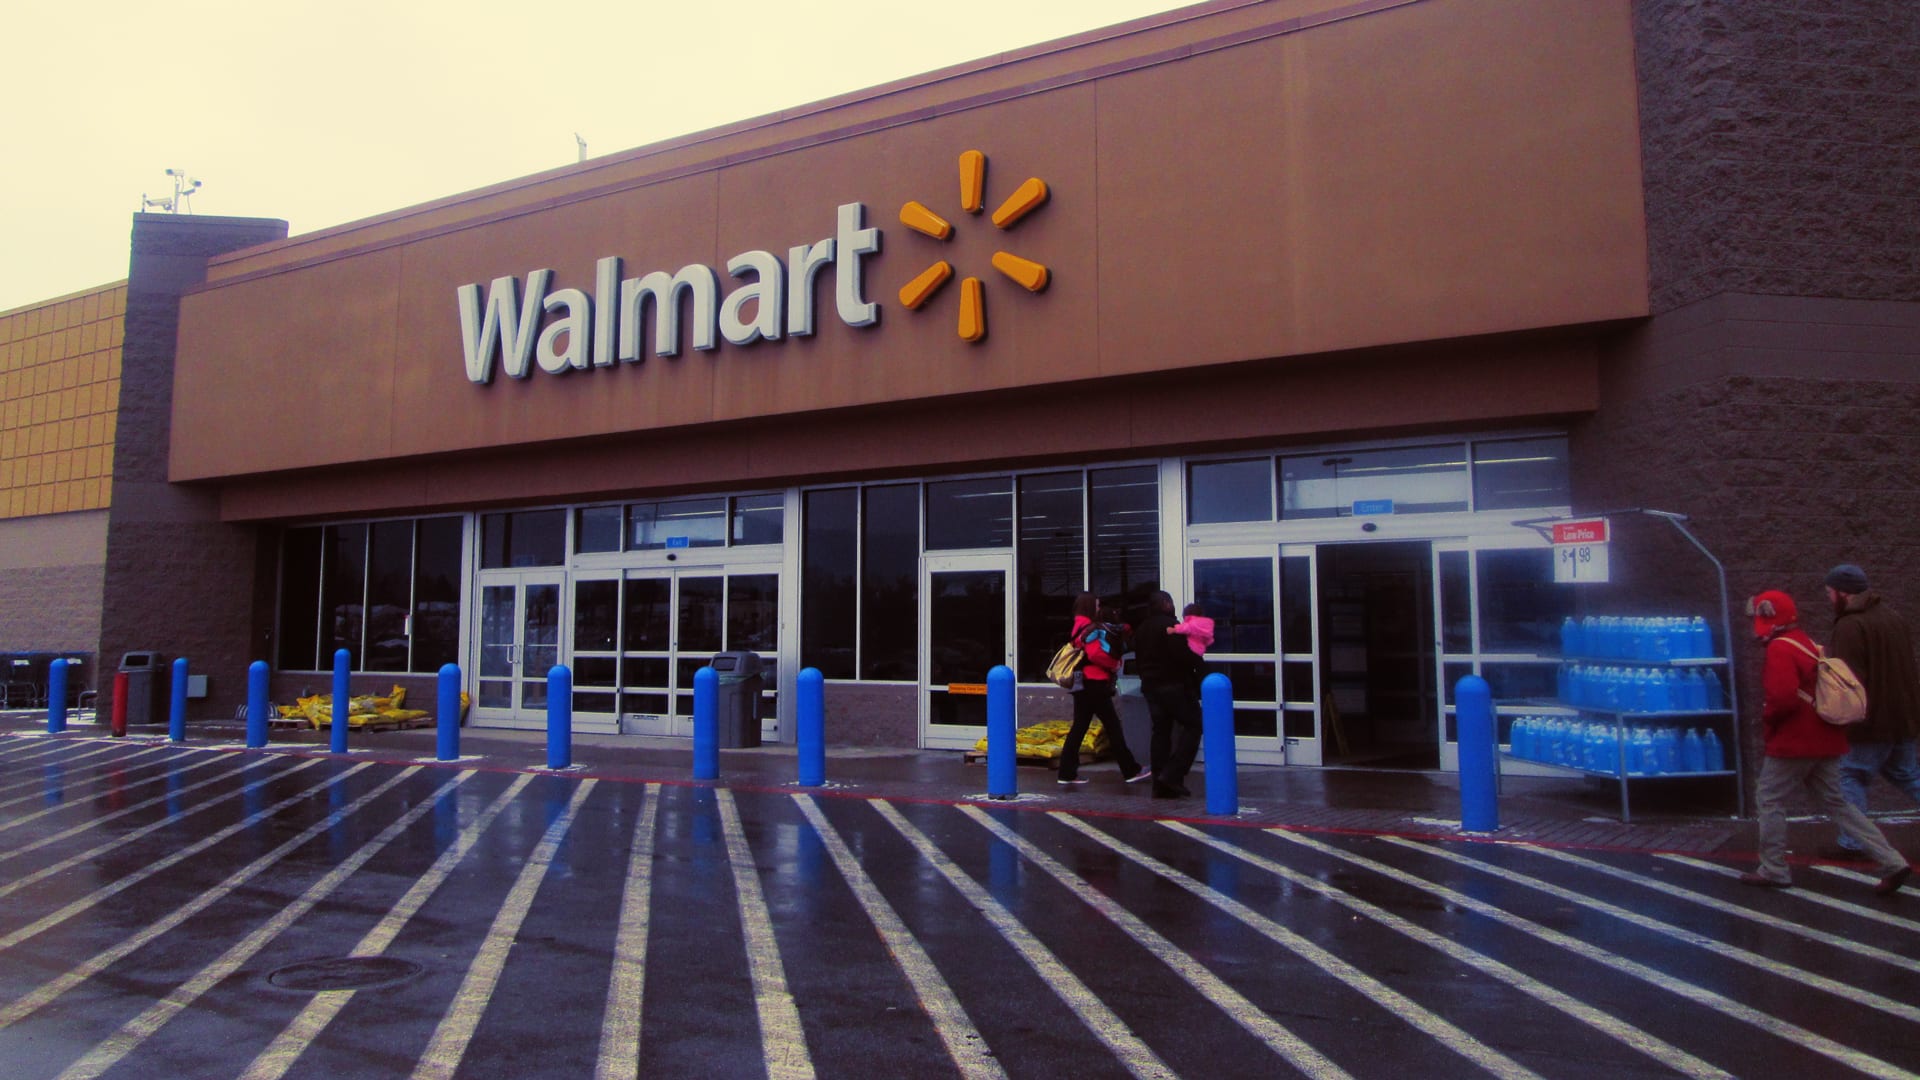 After mass shooting in its store, Walmart takes action by banning video game displays, not guns